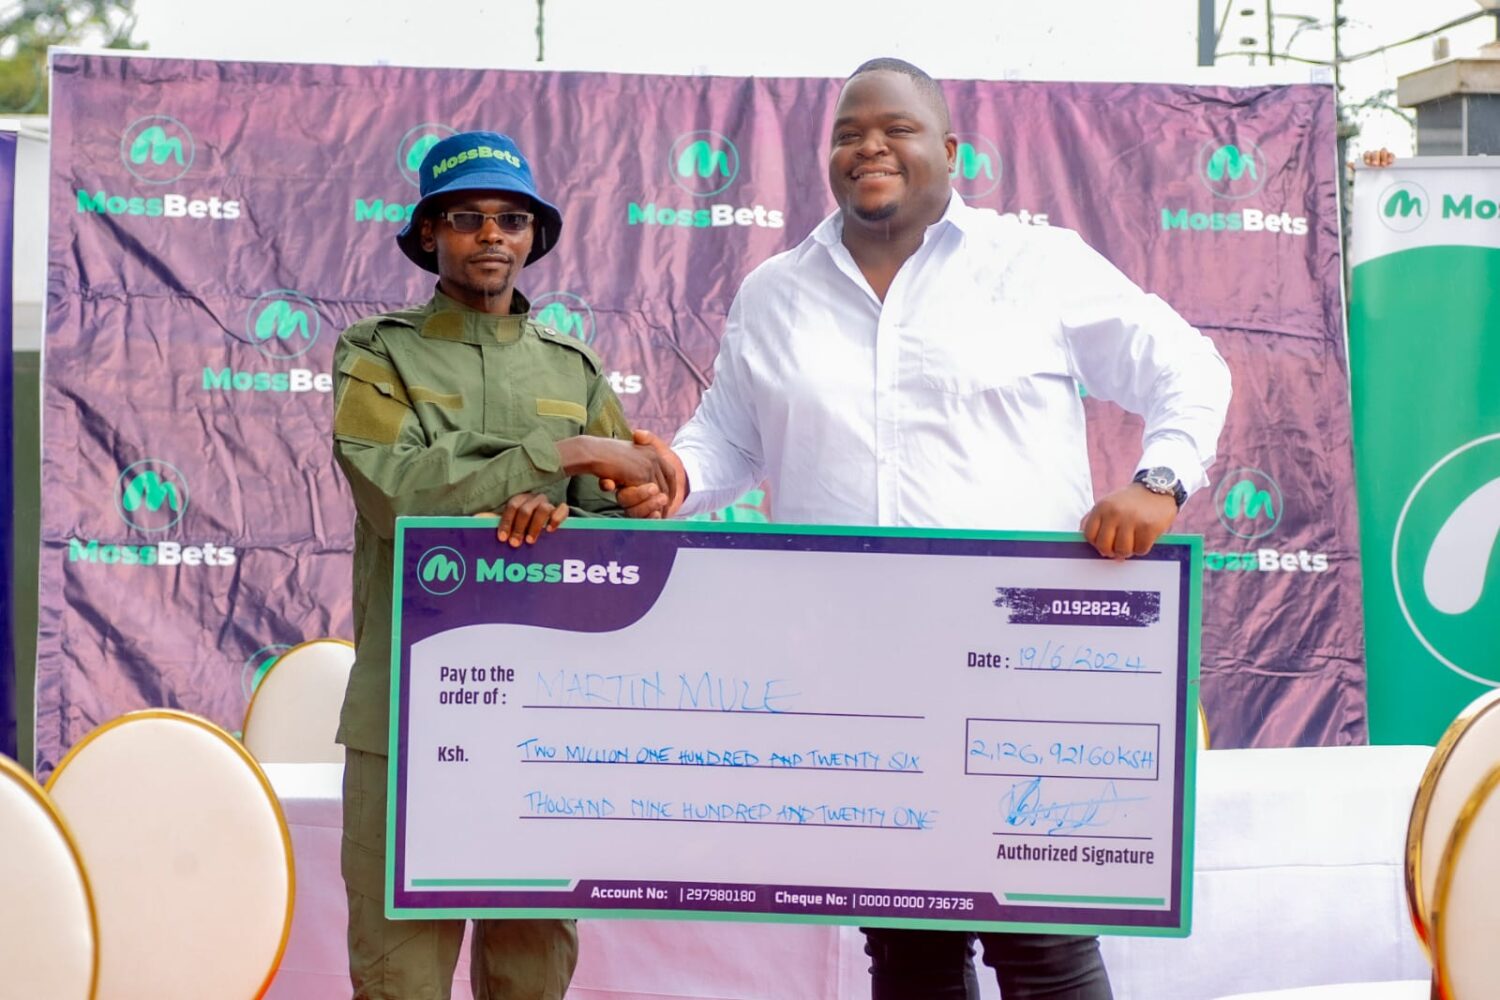 Aviator Game: Mossbets Issues Record-Breaking KSh2.1M Payout